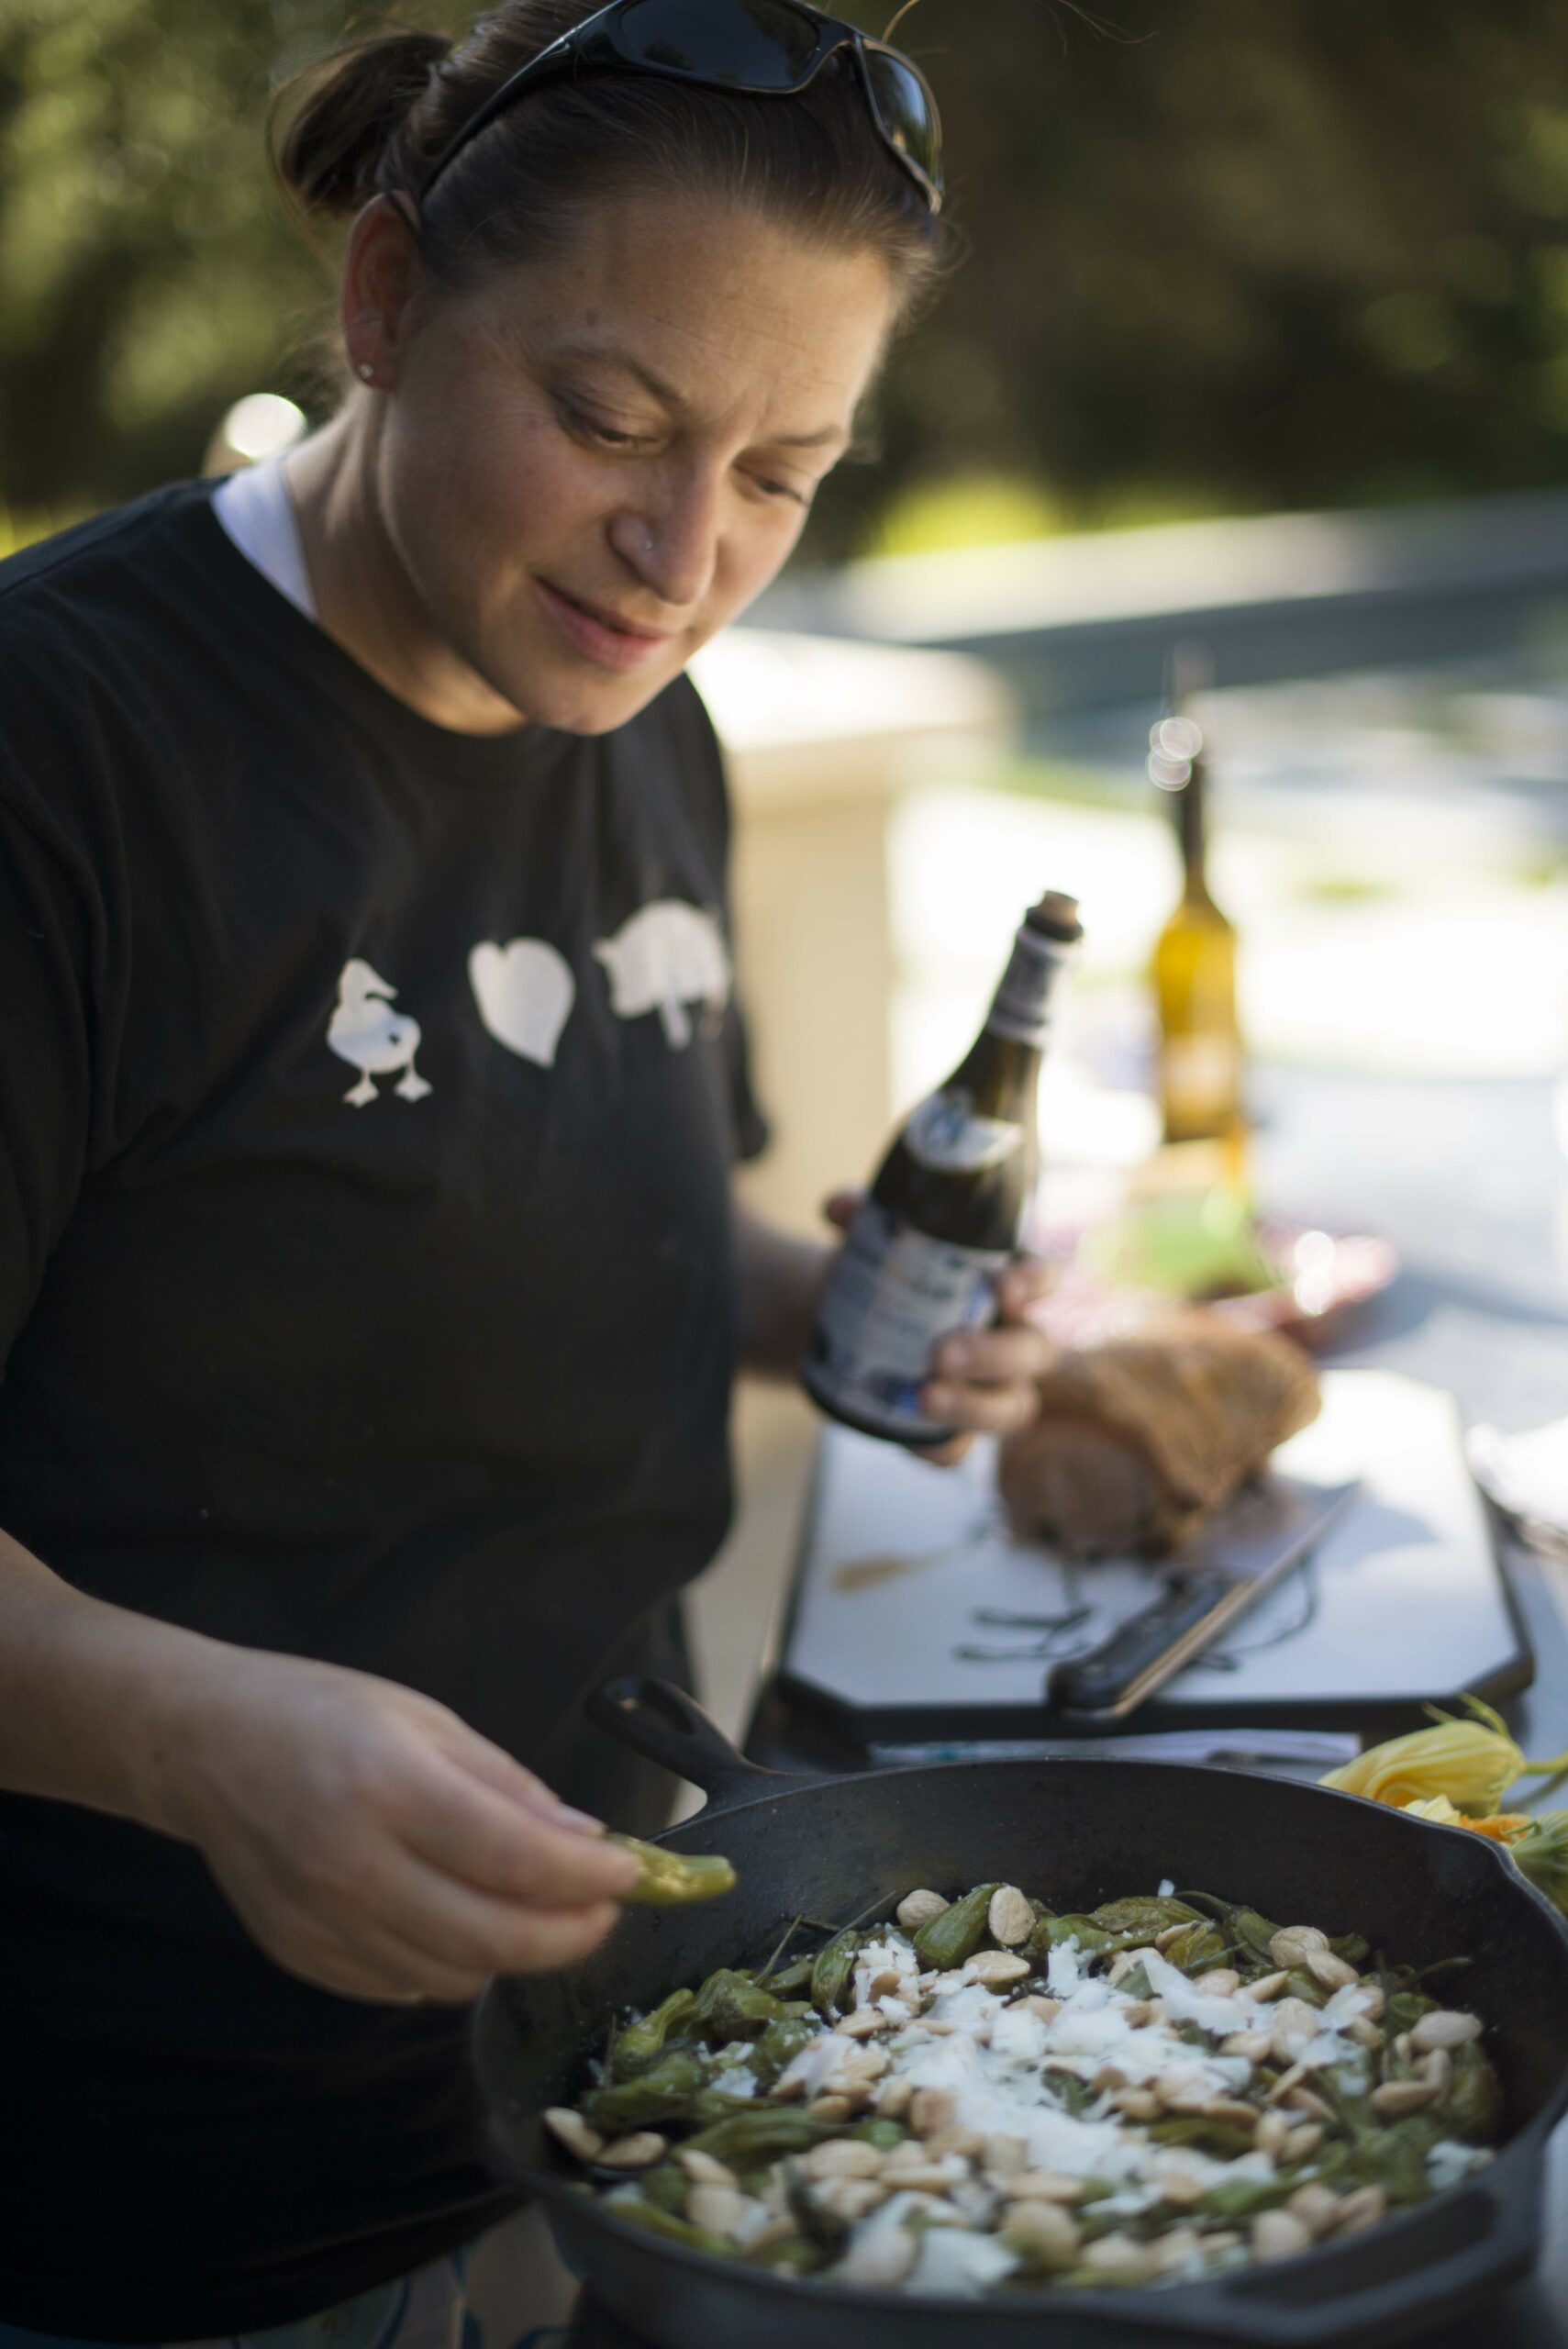 Duskie Estes tasting her wood-fired roasted shishito peppers with Marcona almonds and shavings of Pennyroyal Farm Boont Corners cheese alongside an arugula salad at her home in Forestville, California. June 18, 2016. (Photo: Erik Castro/for Sonoma Magazine)